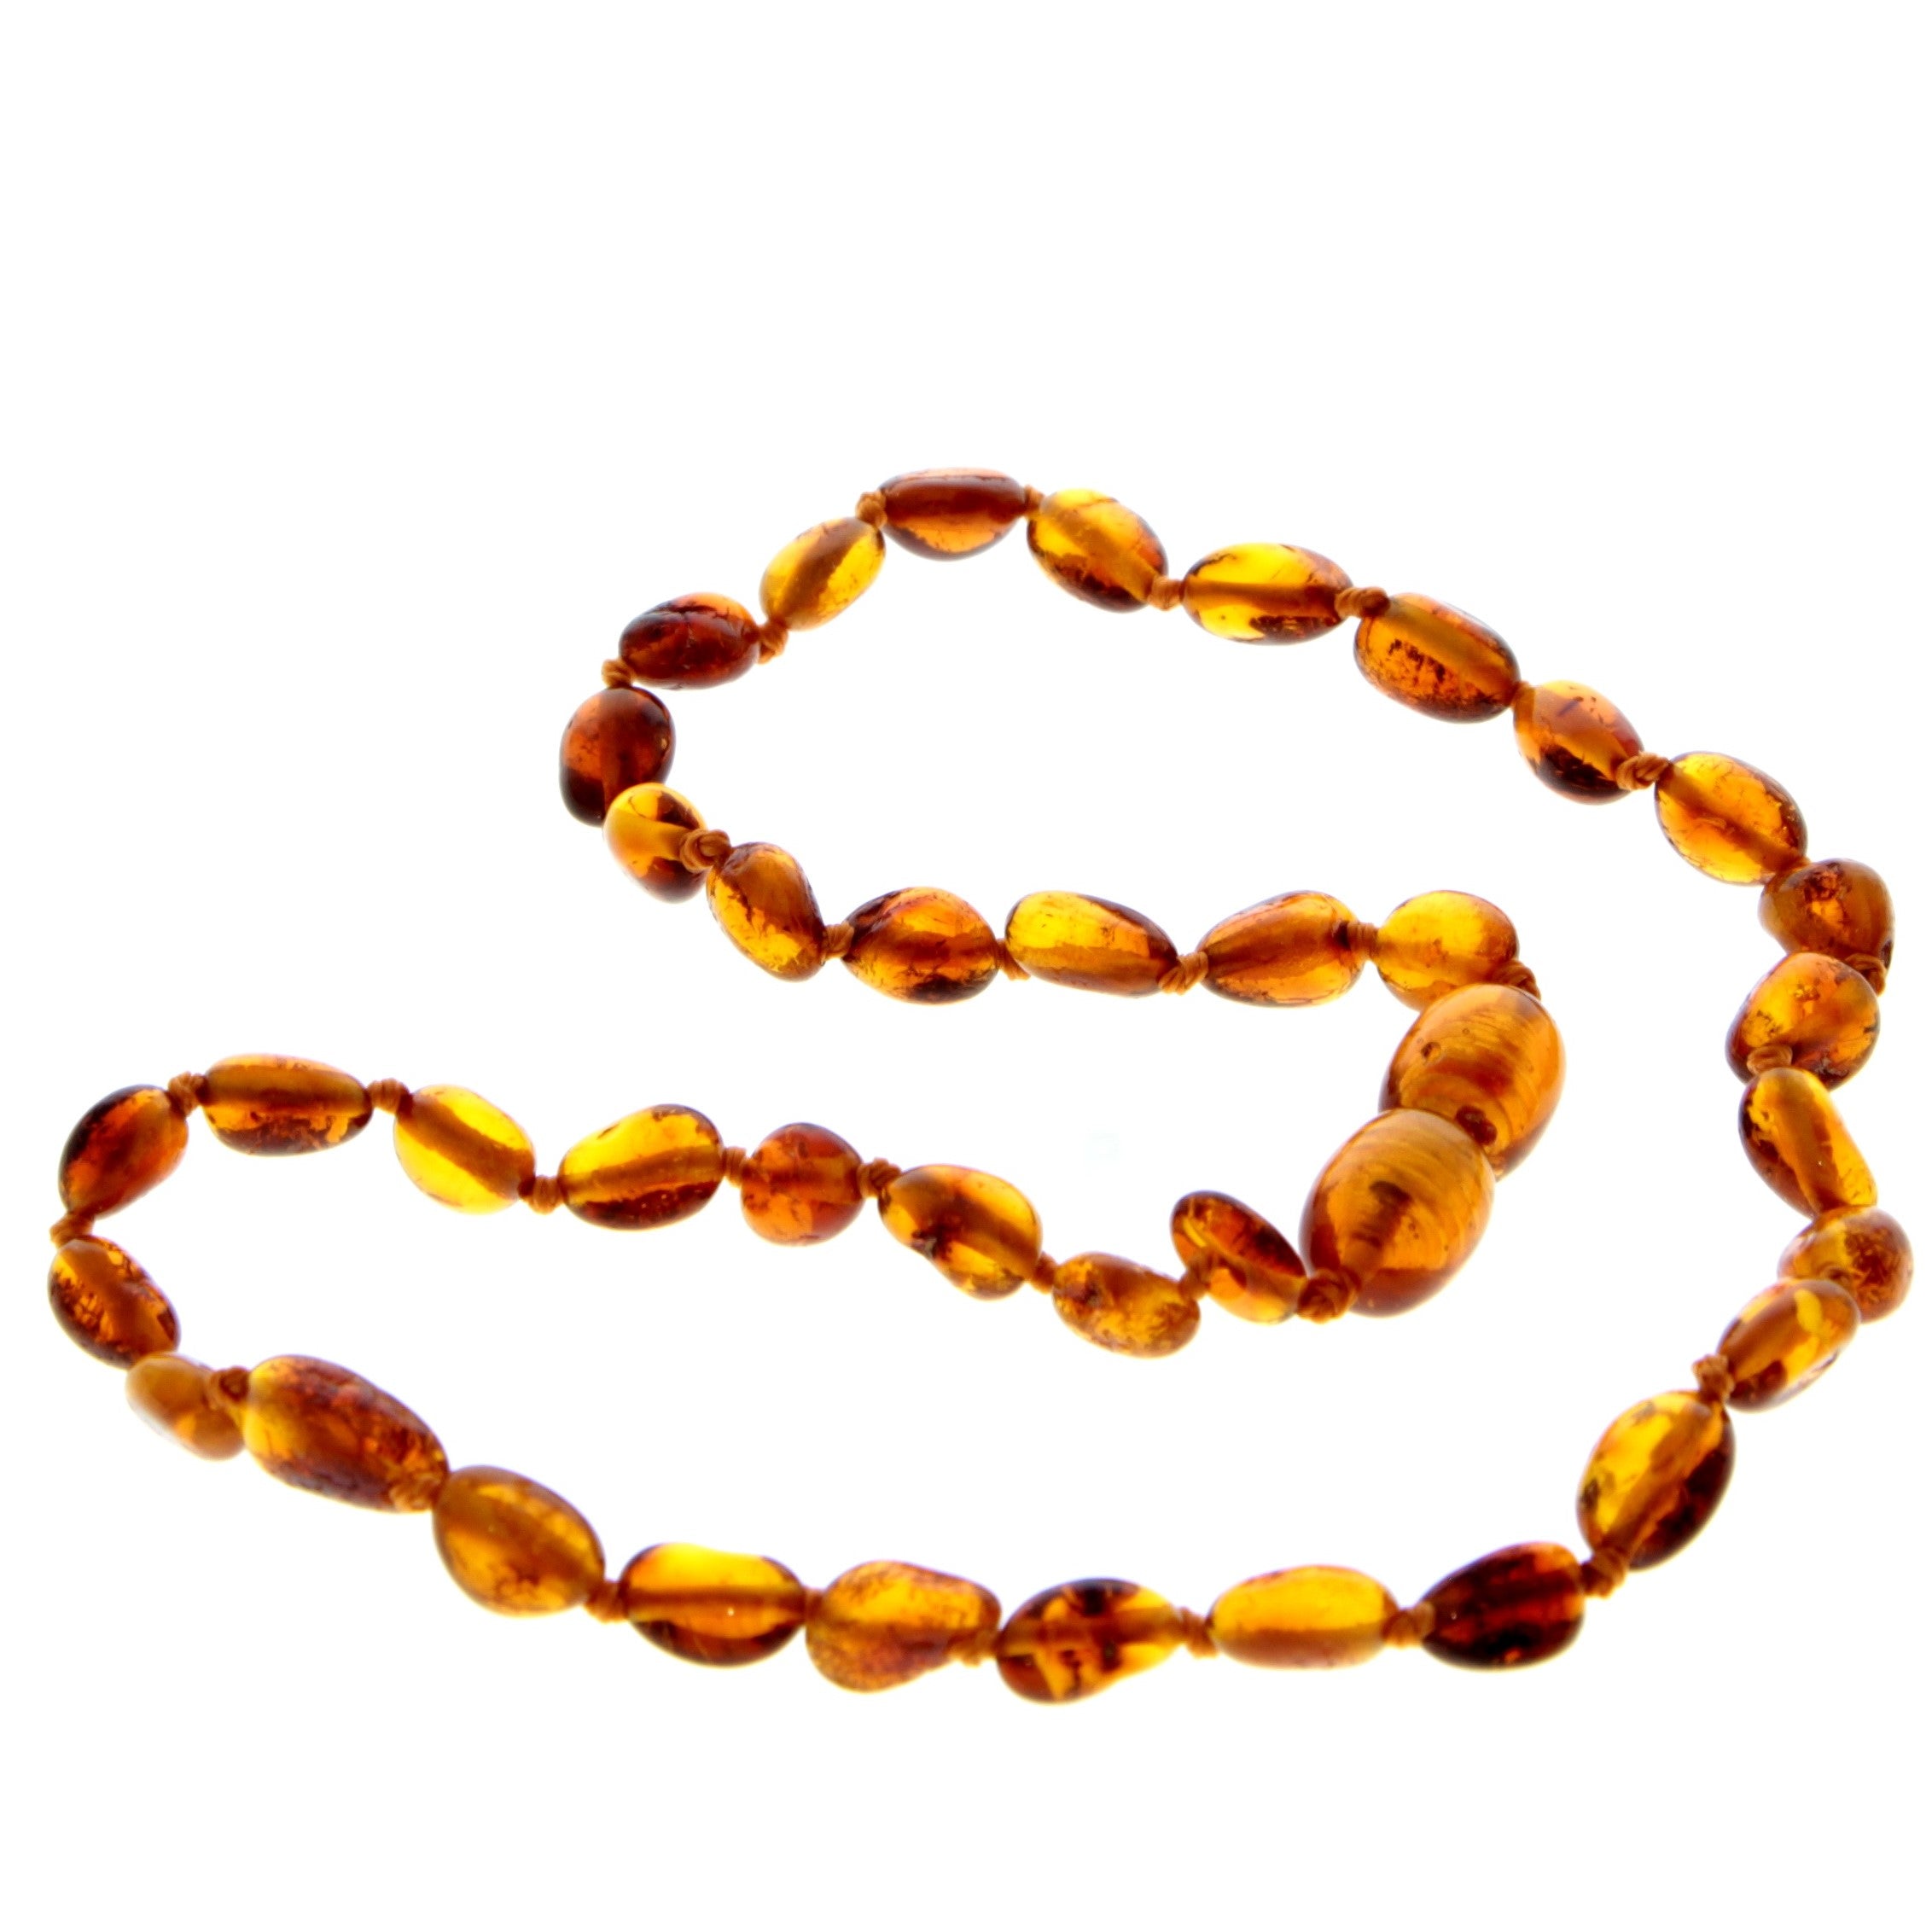 Genuine Baltic Amber Polished BEANS Beaded Necklace in various colours & sizes. All beads knotted in between.